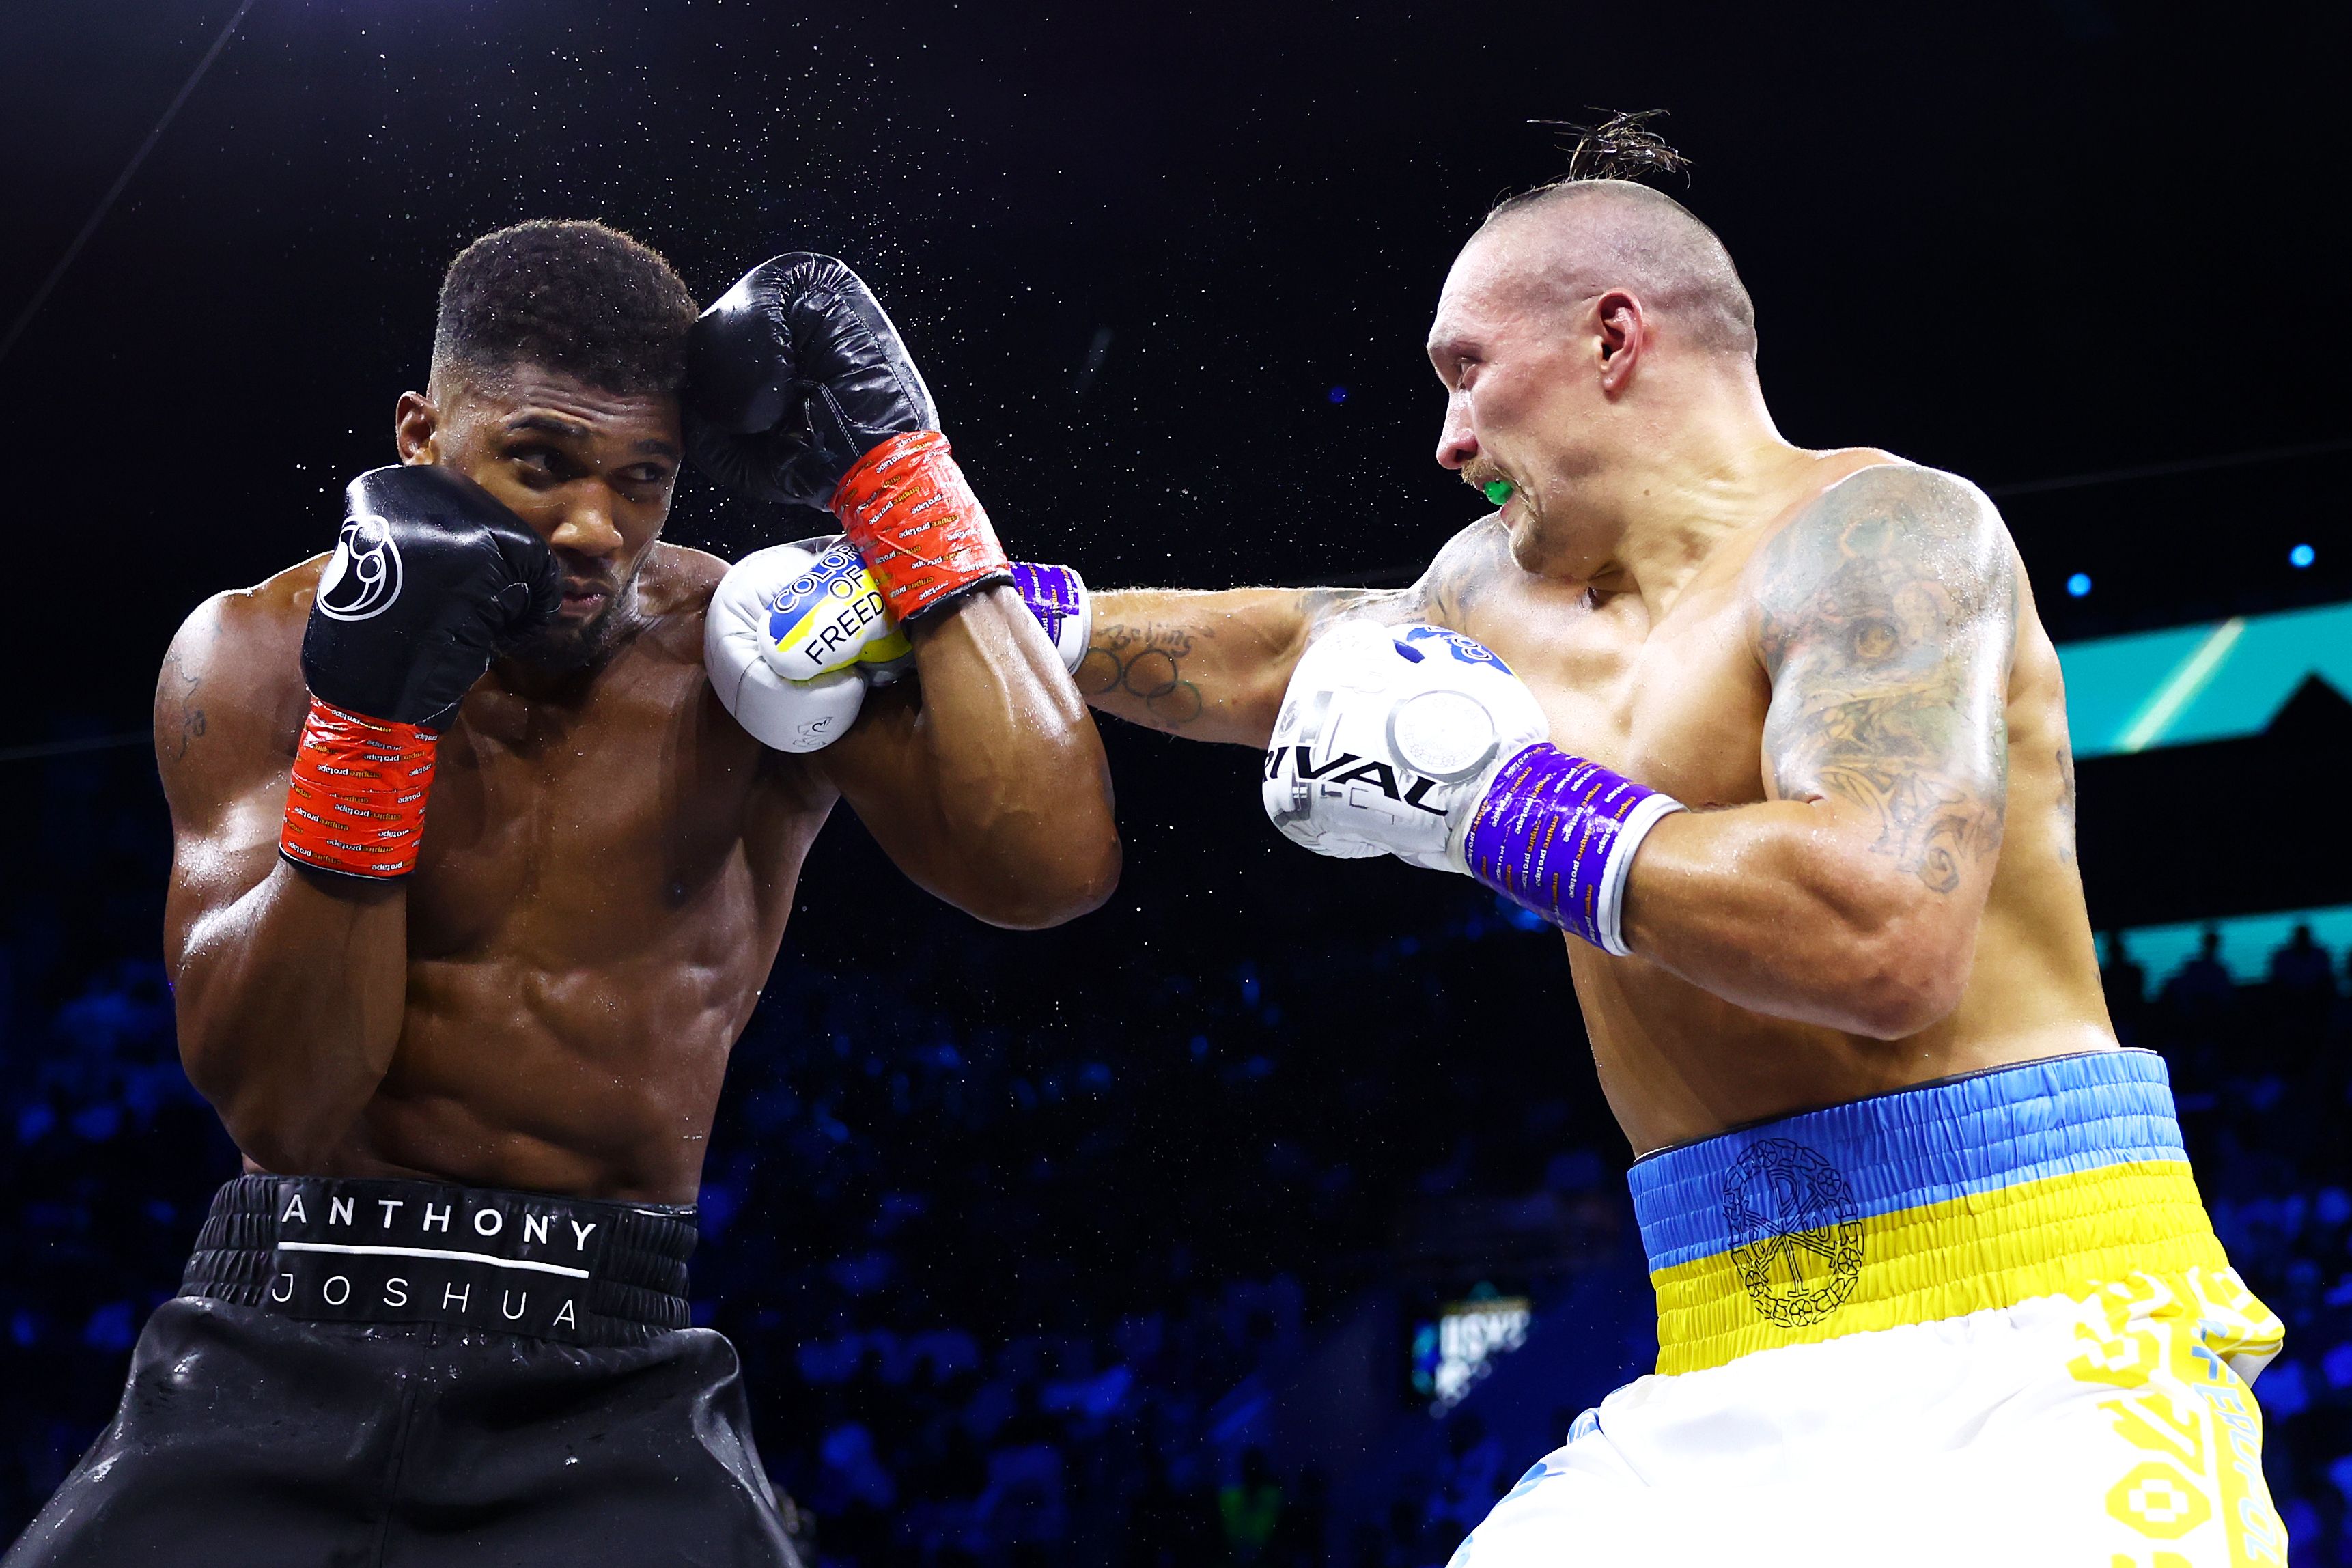 Oleksandr Usyk beat Anthony Joshua in their rematch